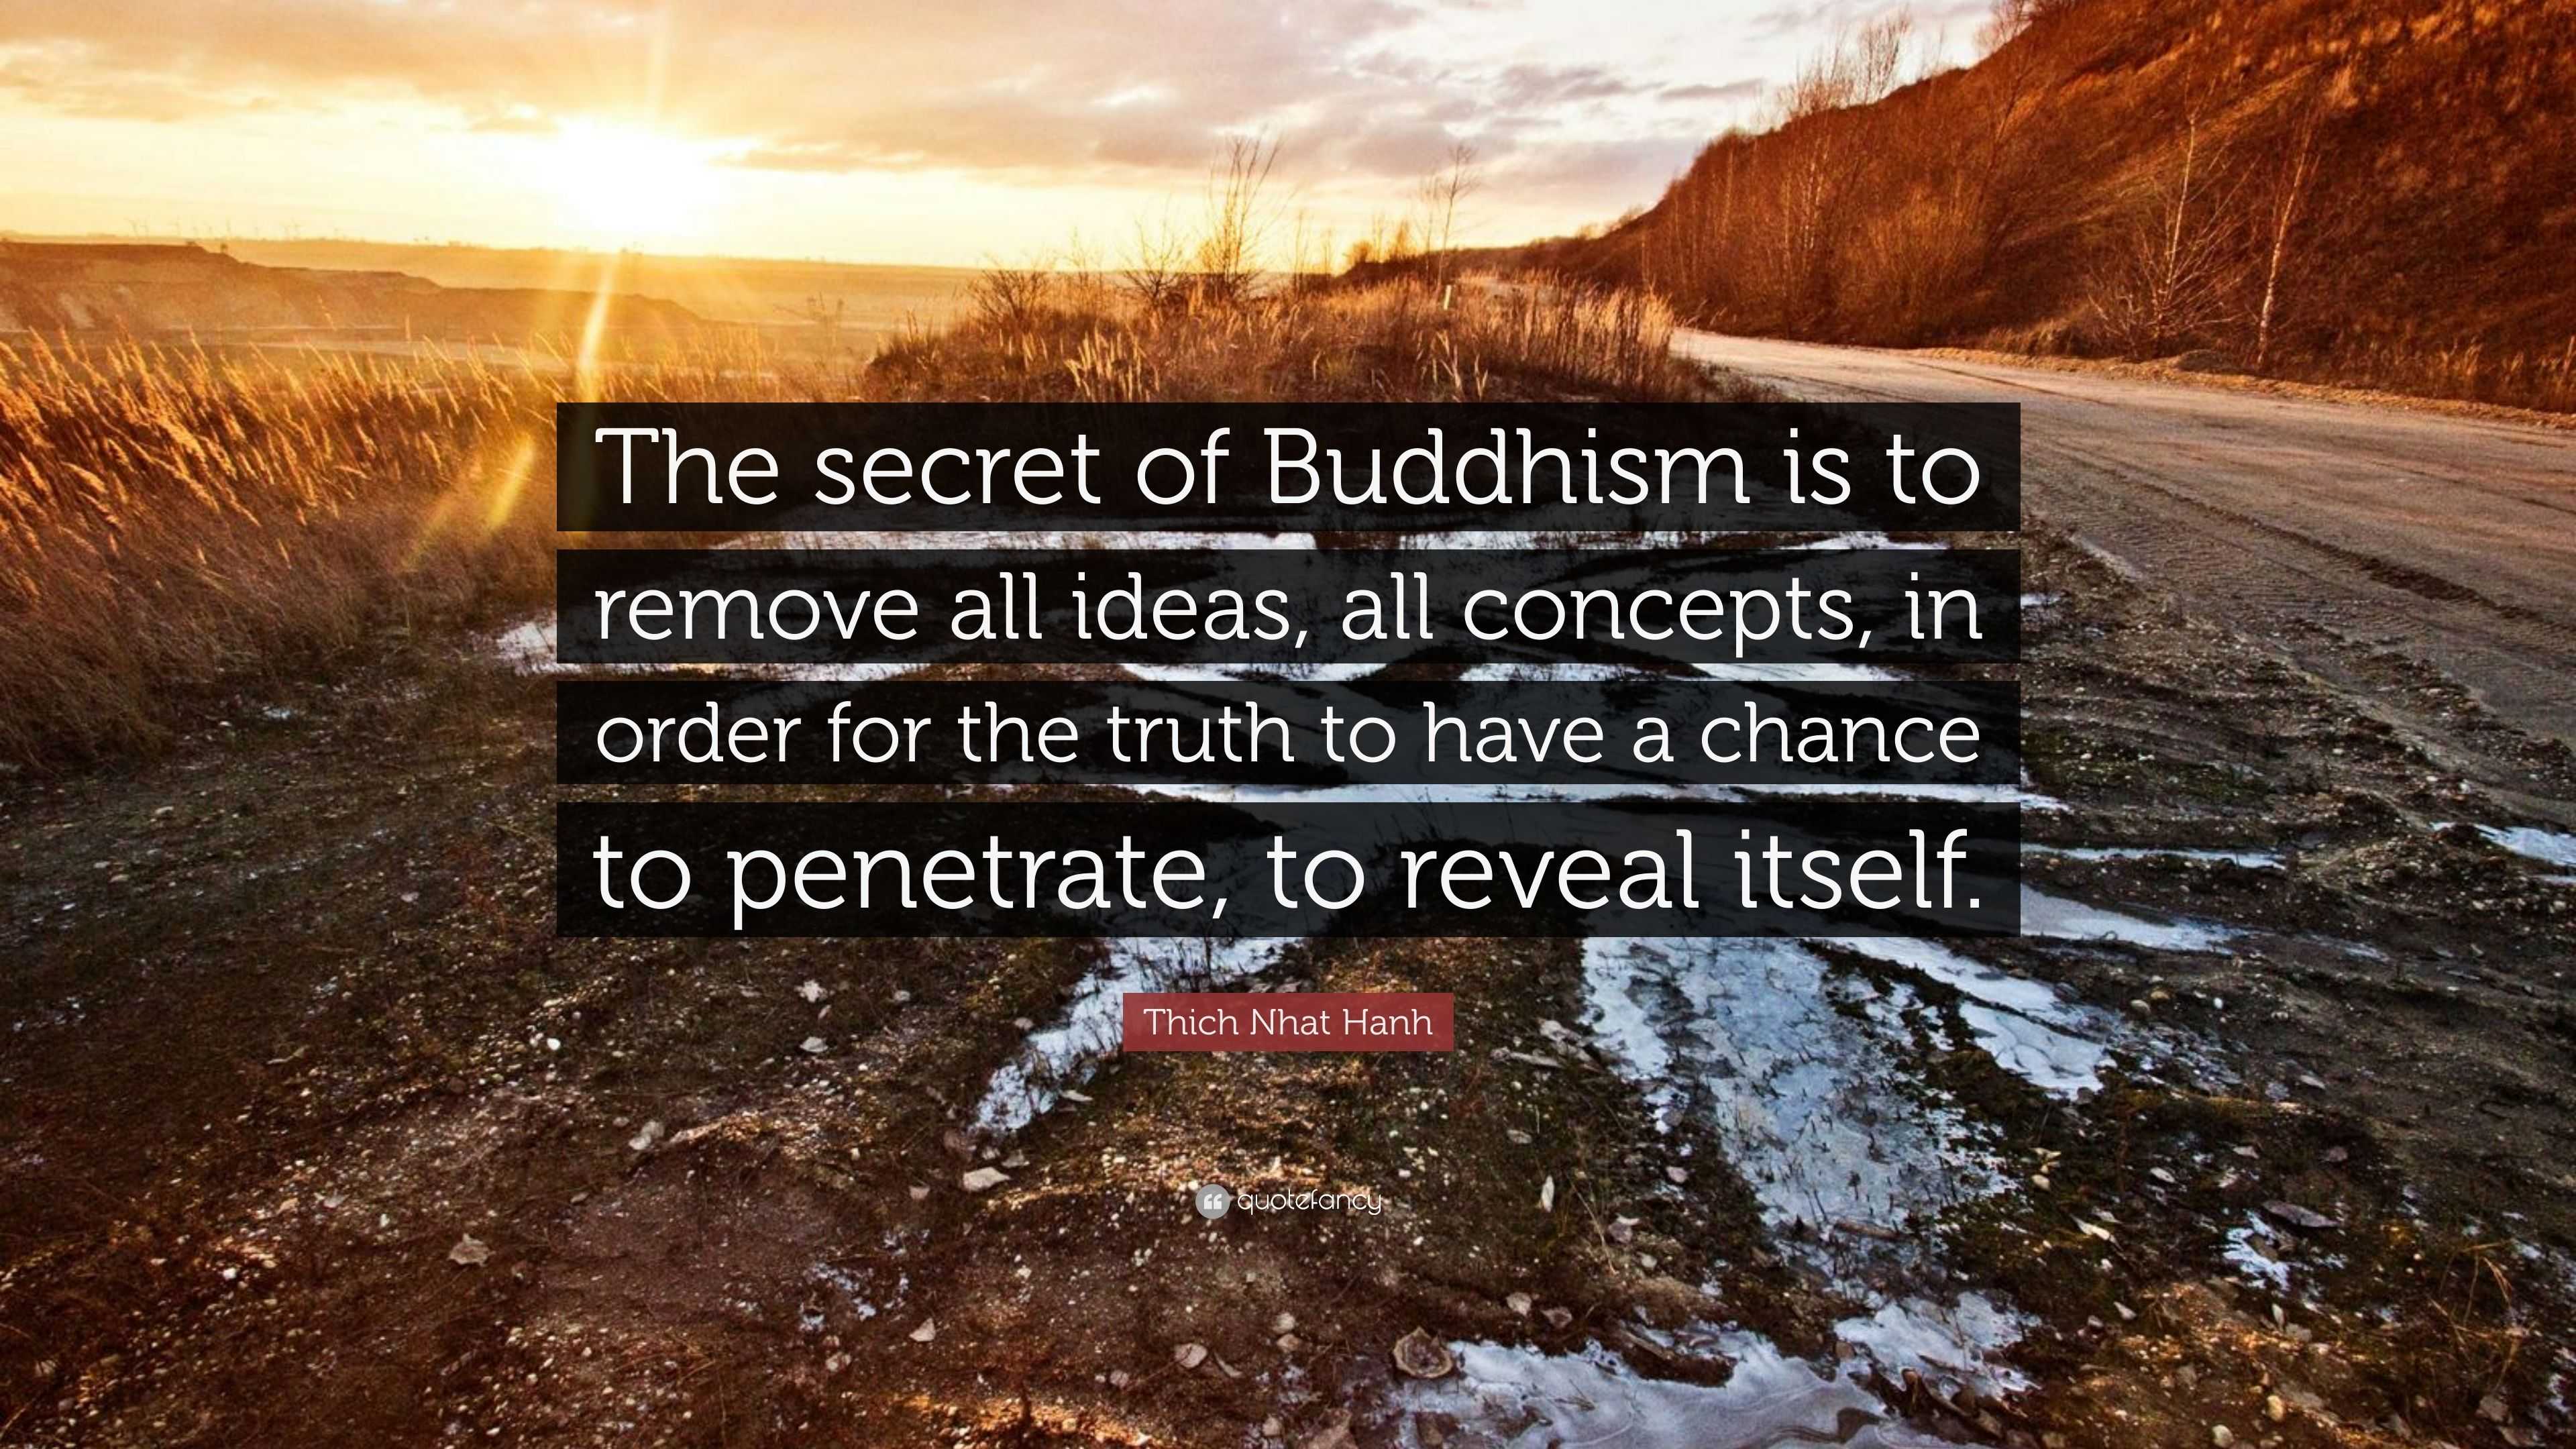 Thich Nhat Hanh Quote: “The secret of Buddhism is to ...